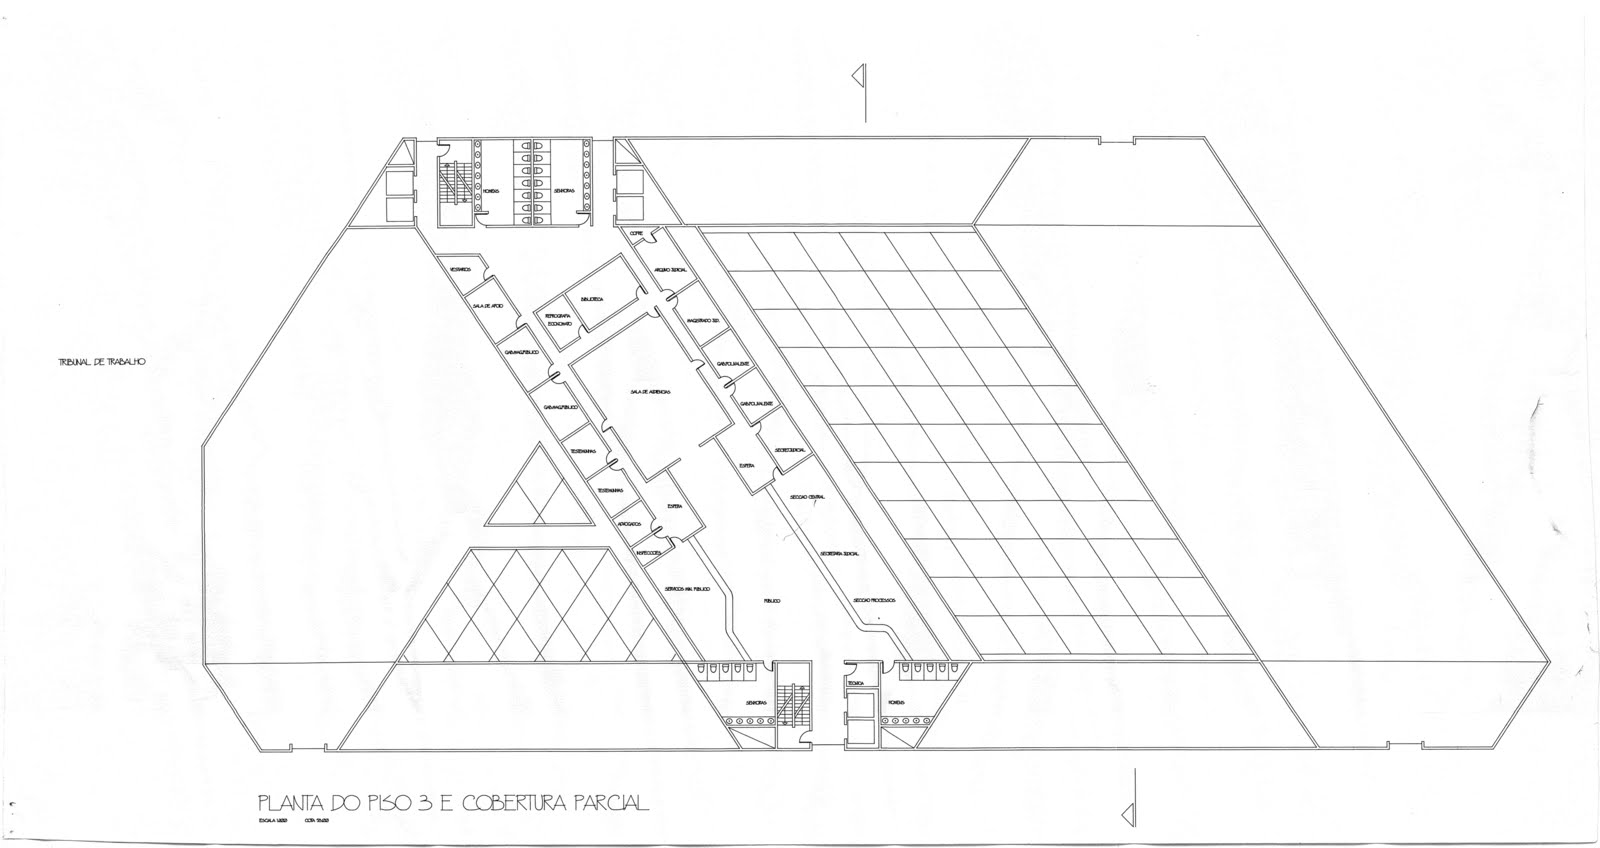 PJC - Preliminary Schematic Floor Plan lay-out